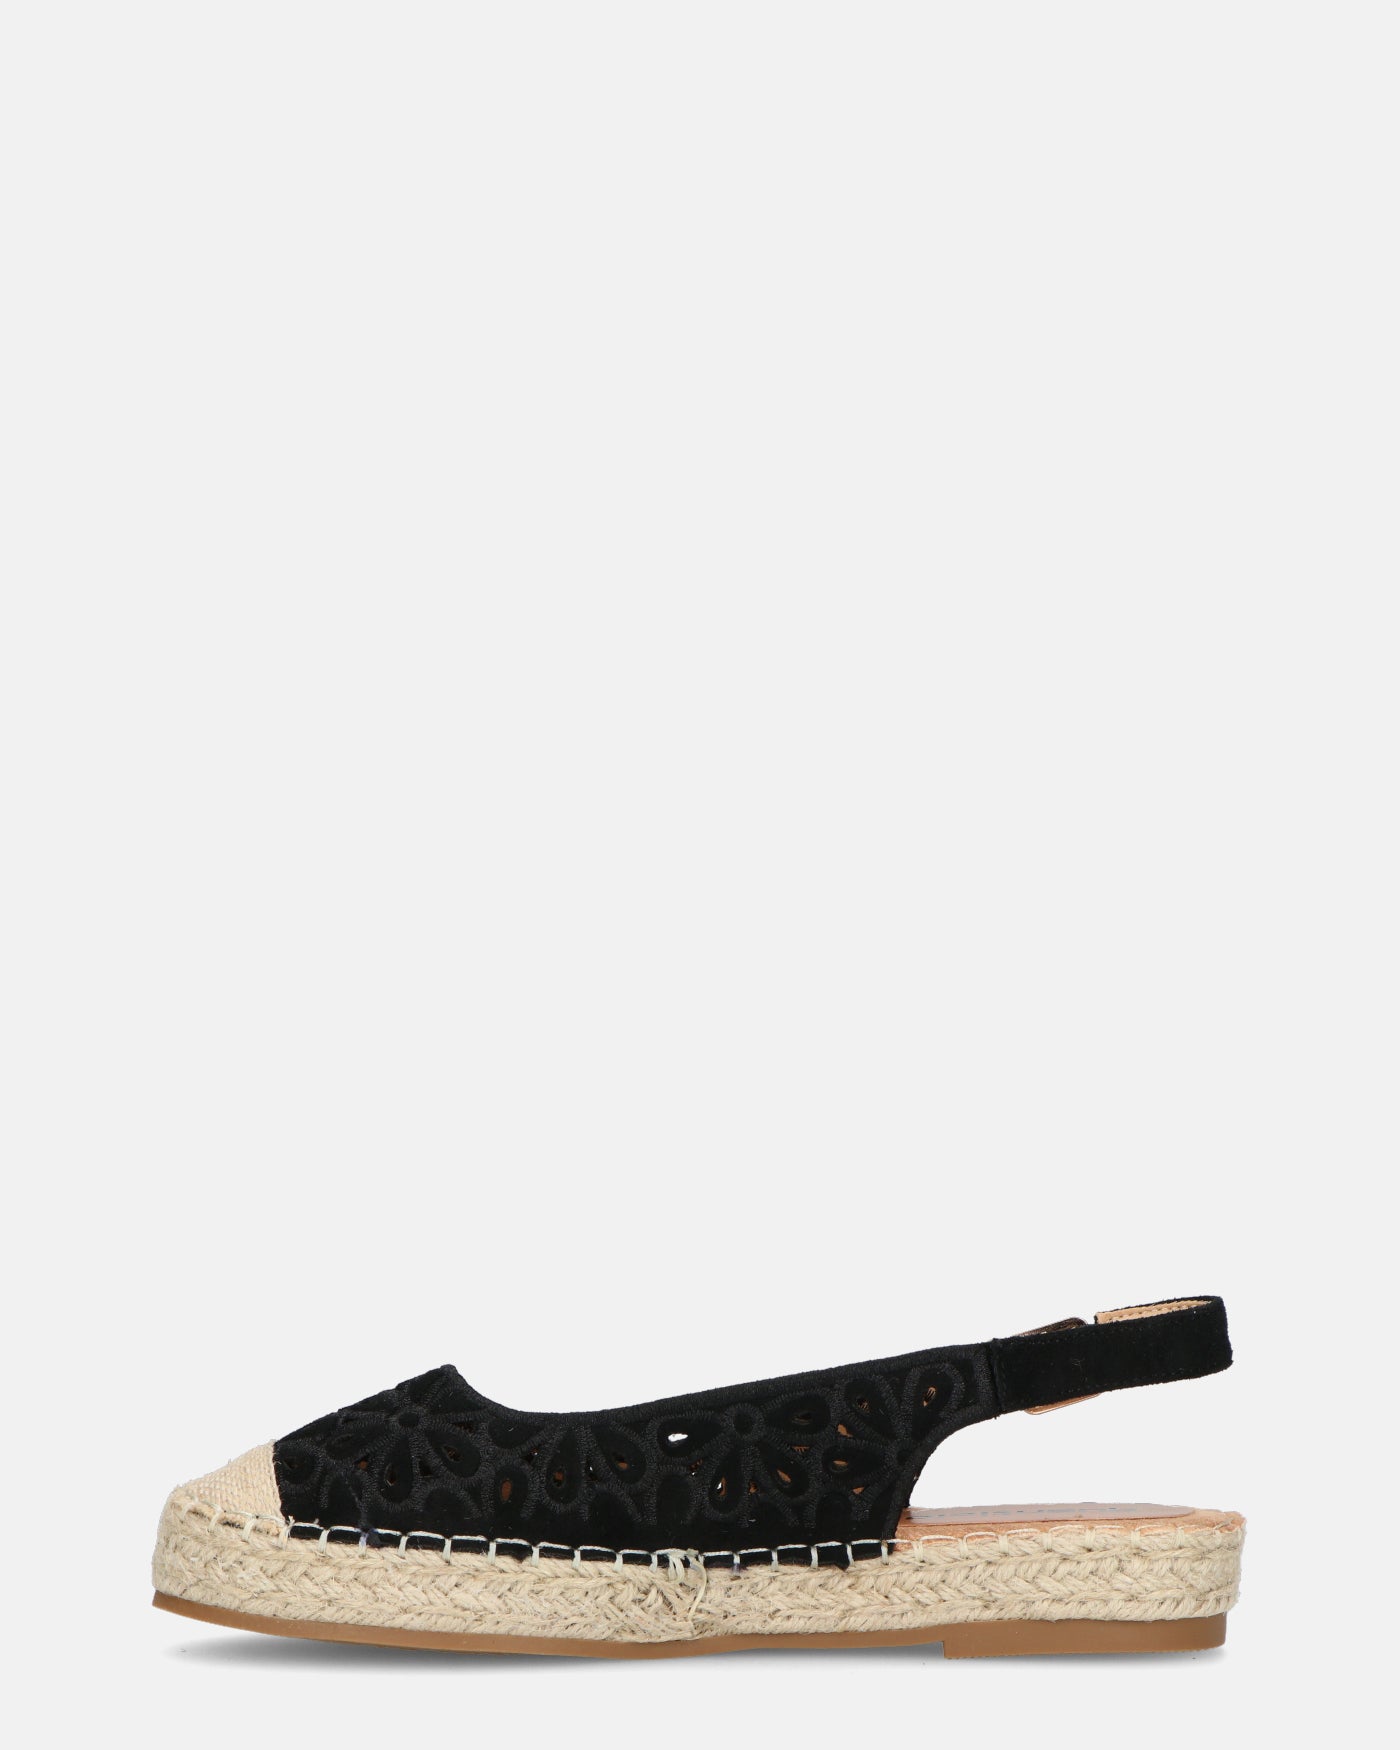 CAREY - sandals with embroidered texture and straw sole